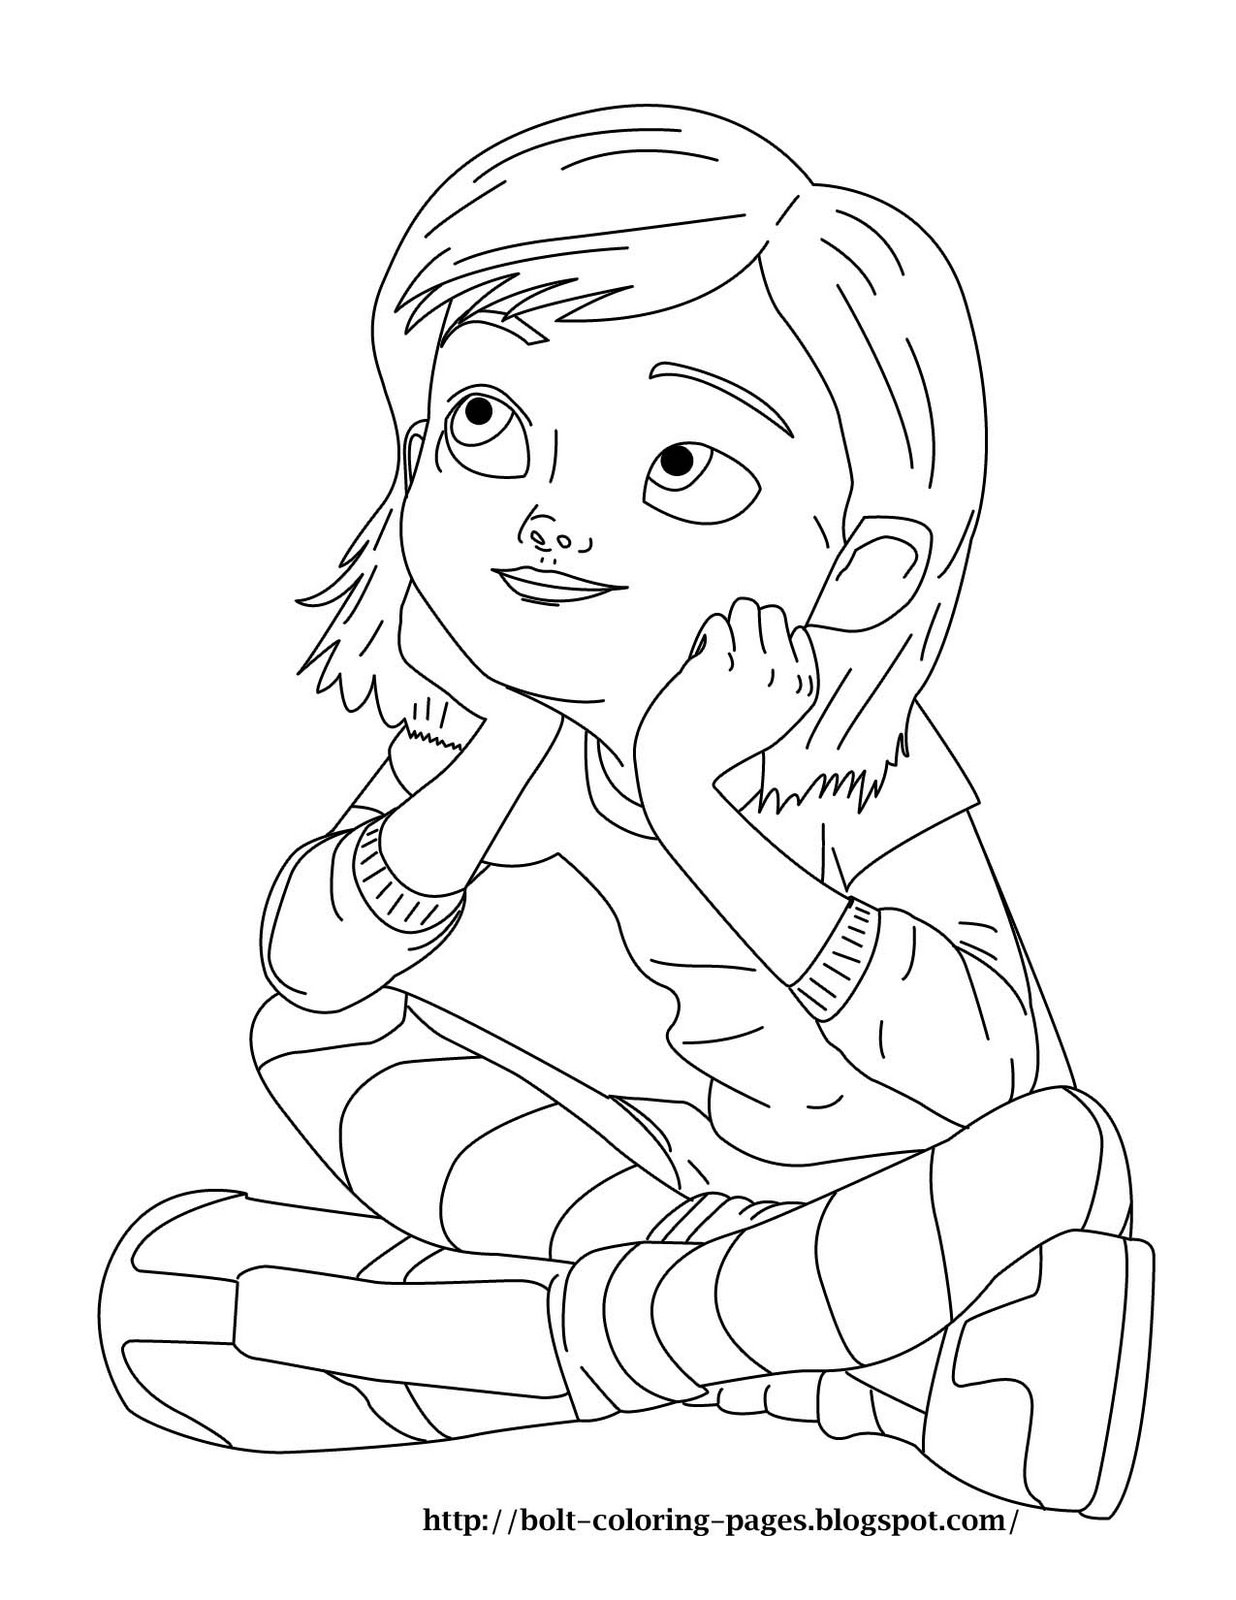 Penny Coloring Page at GetColorings.com | Free printable colorings ...